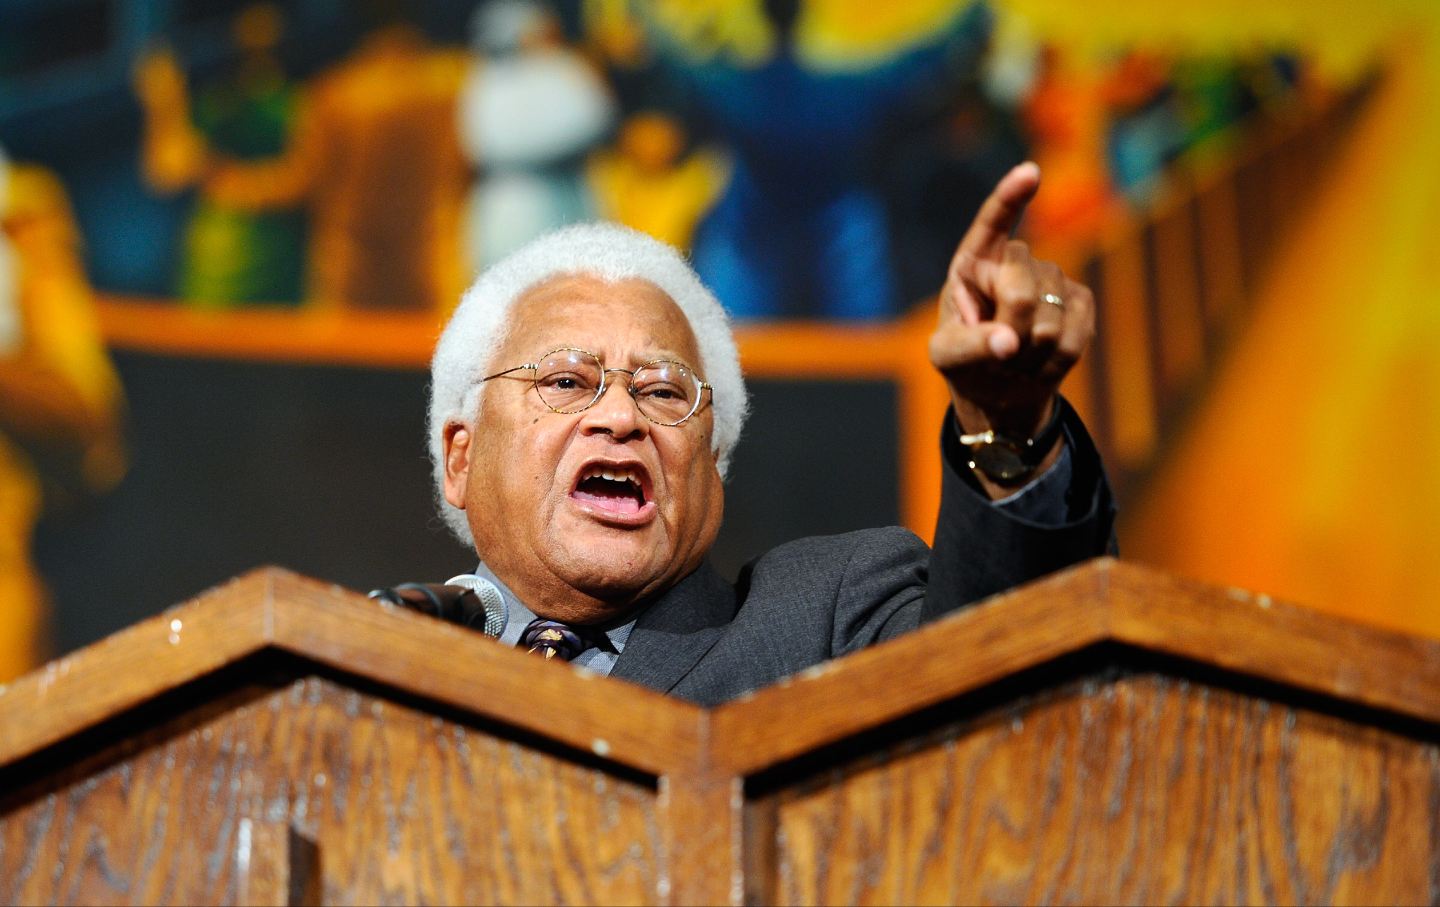 Rev. James Lawson speaks from the pulpit of the First AME Church during an event in solidarity with union workers in Wisconsin on the anniversary of Dr. Martin Luther King Jr.s assassination on April 4, 2011 in Los Angeles, California.